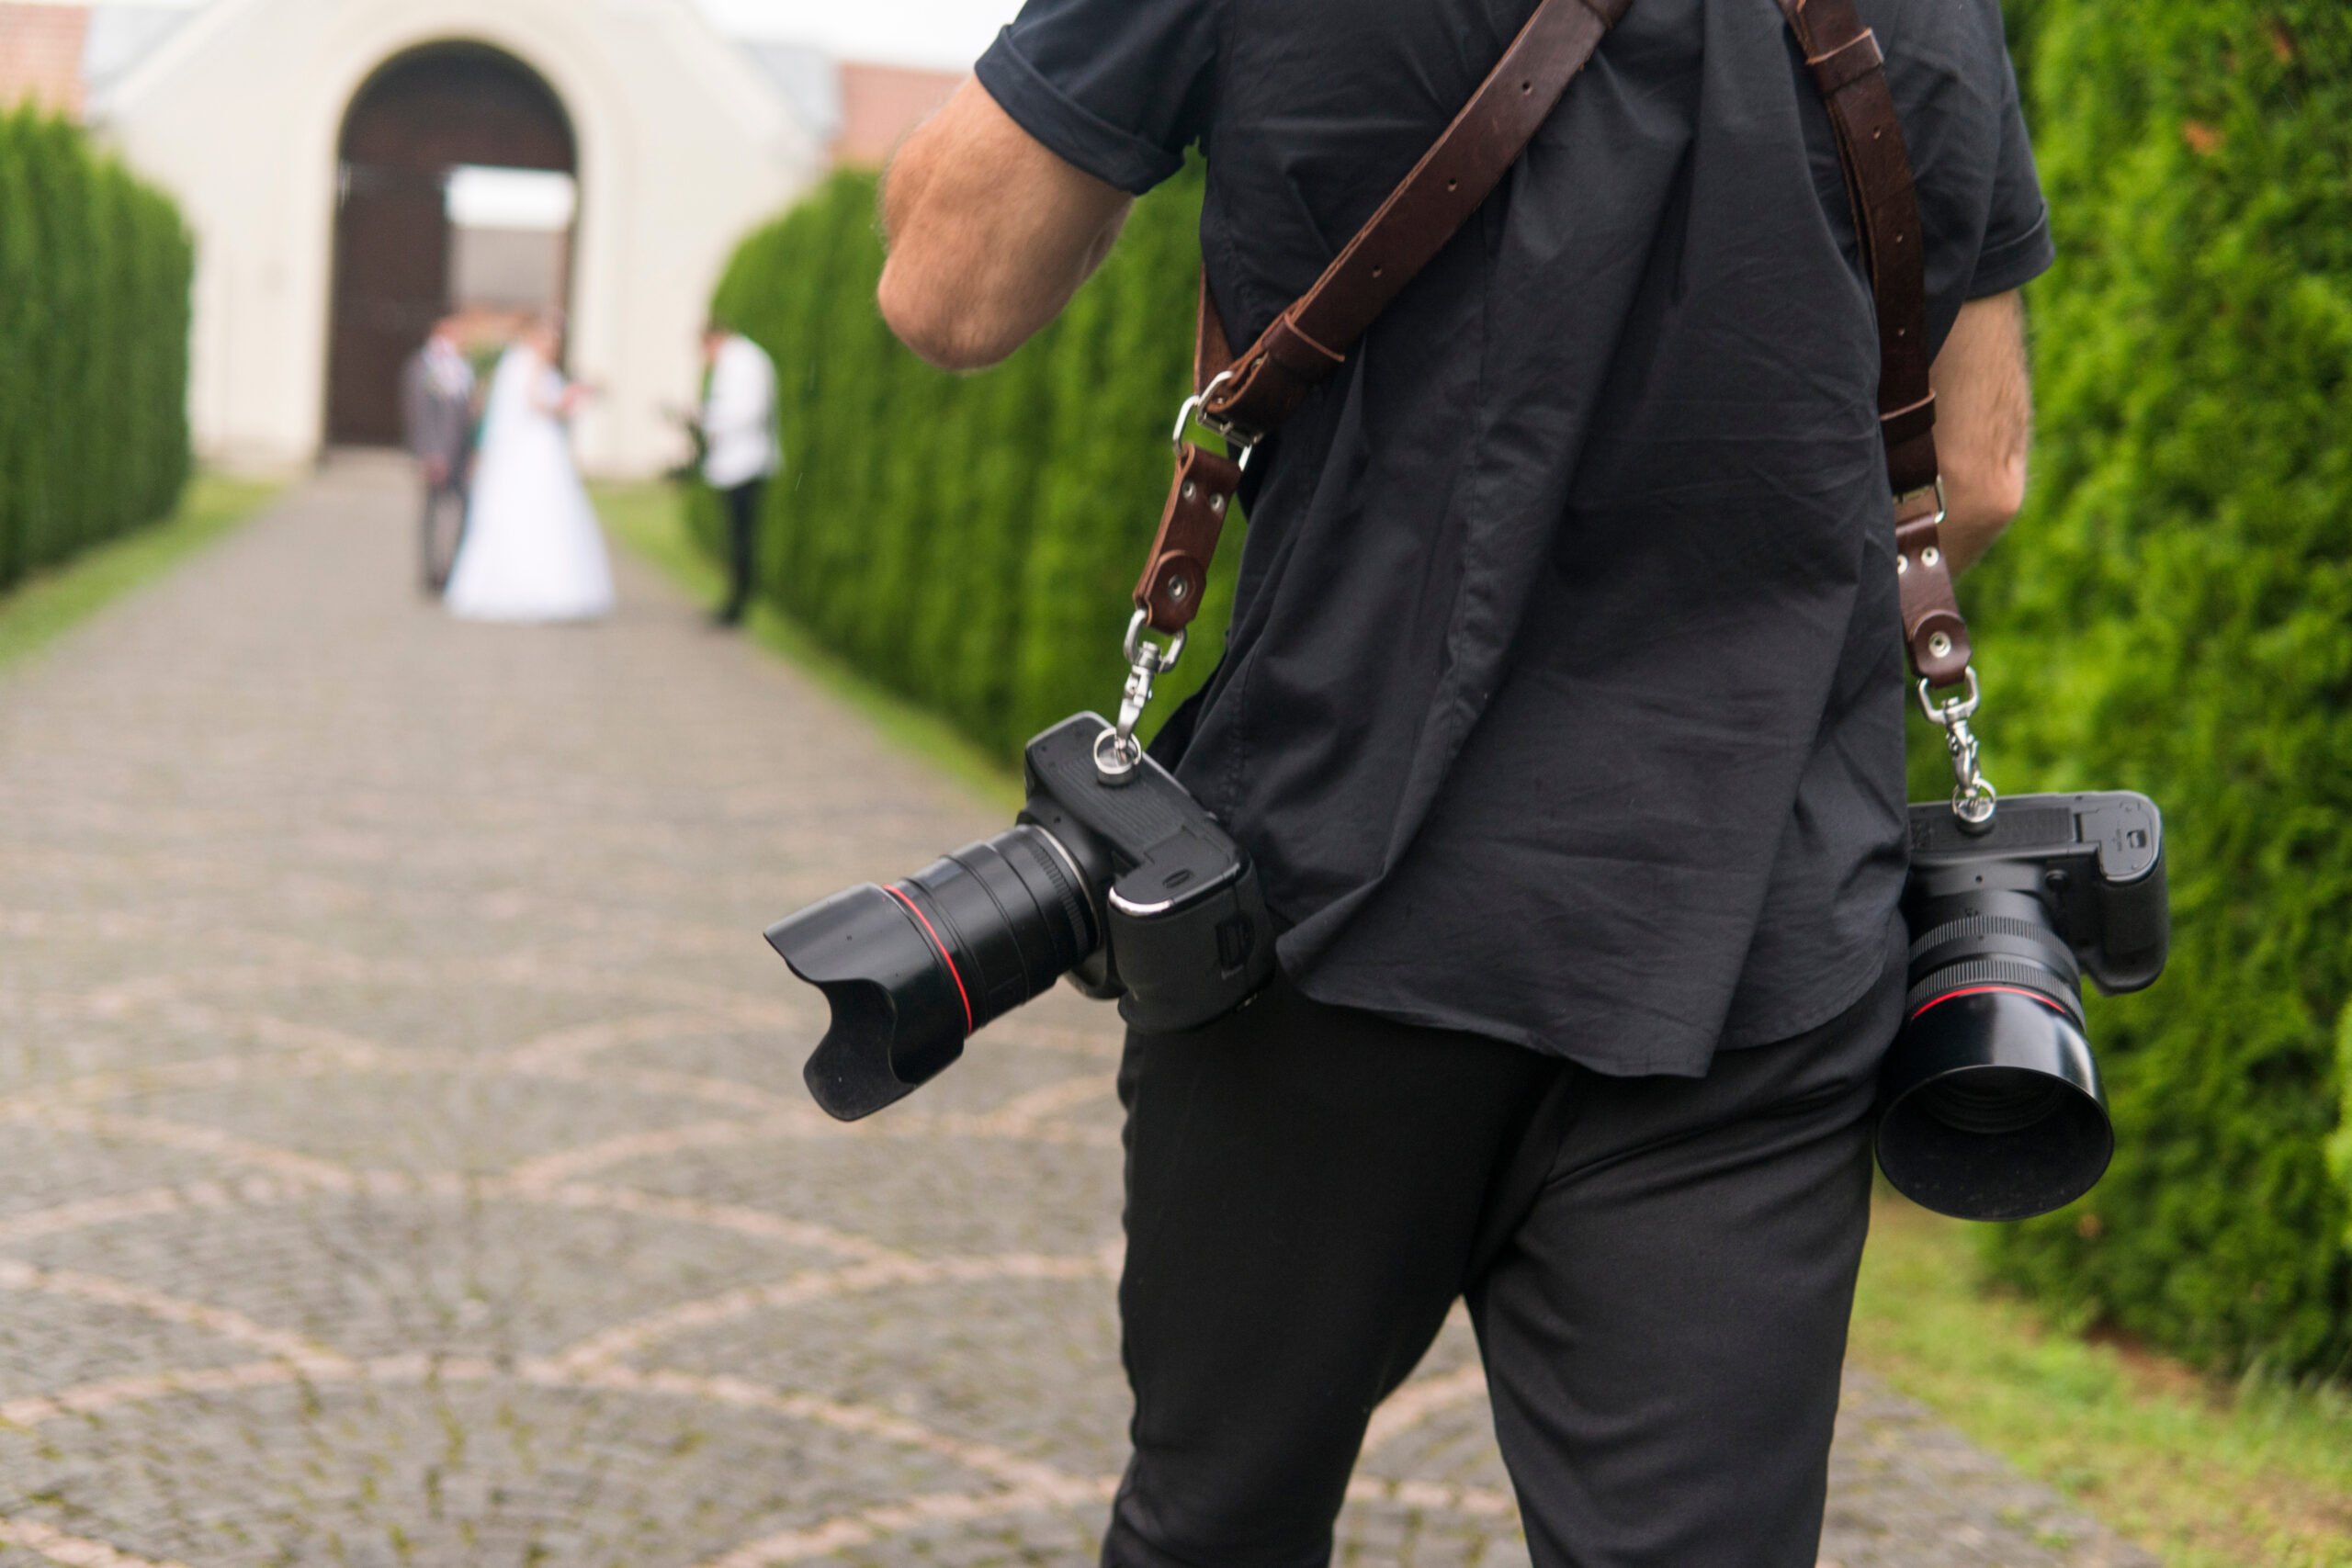 Professional wedding photographer with two cameras on a shoulder straps taking pictures of the bride and groom in a garden